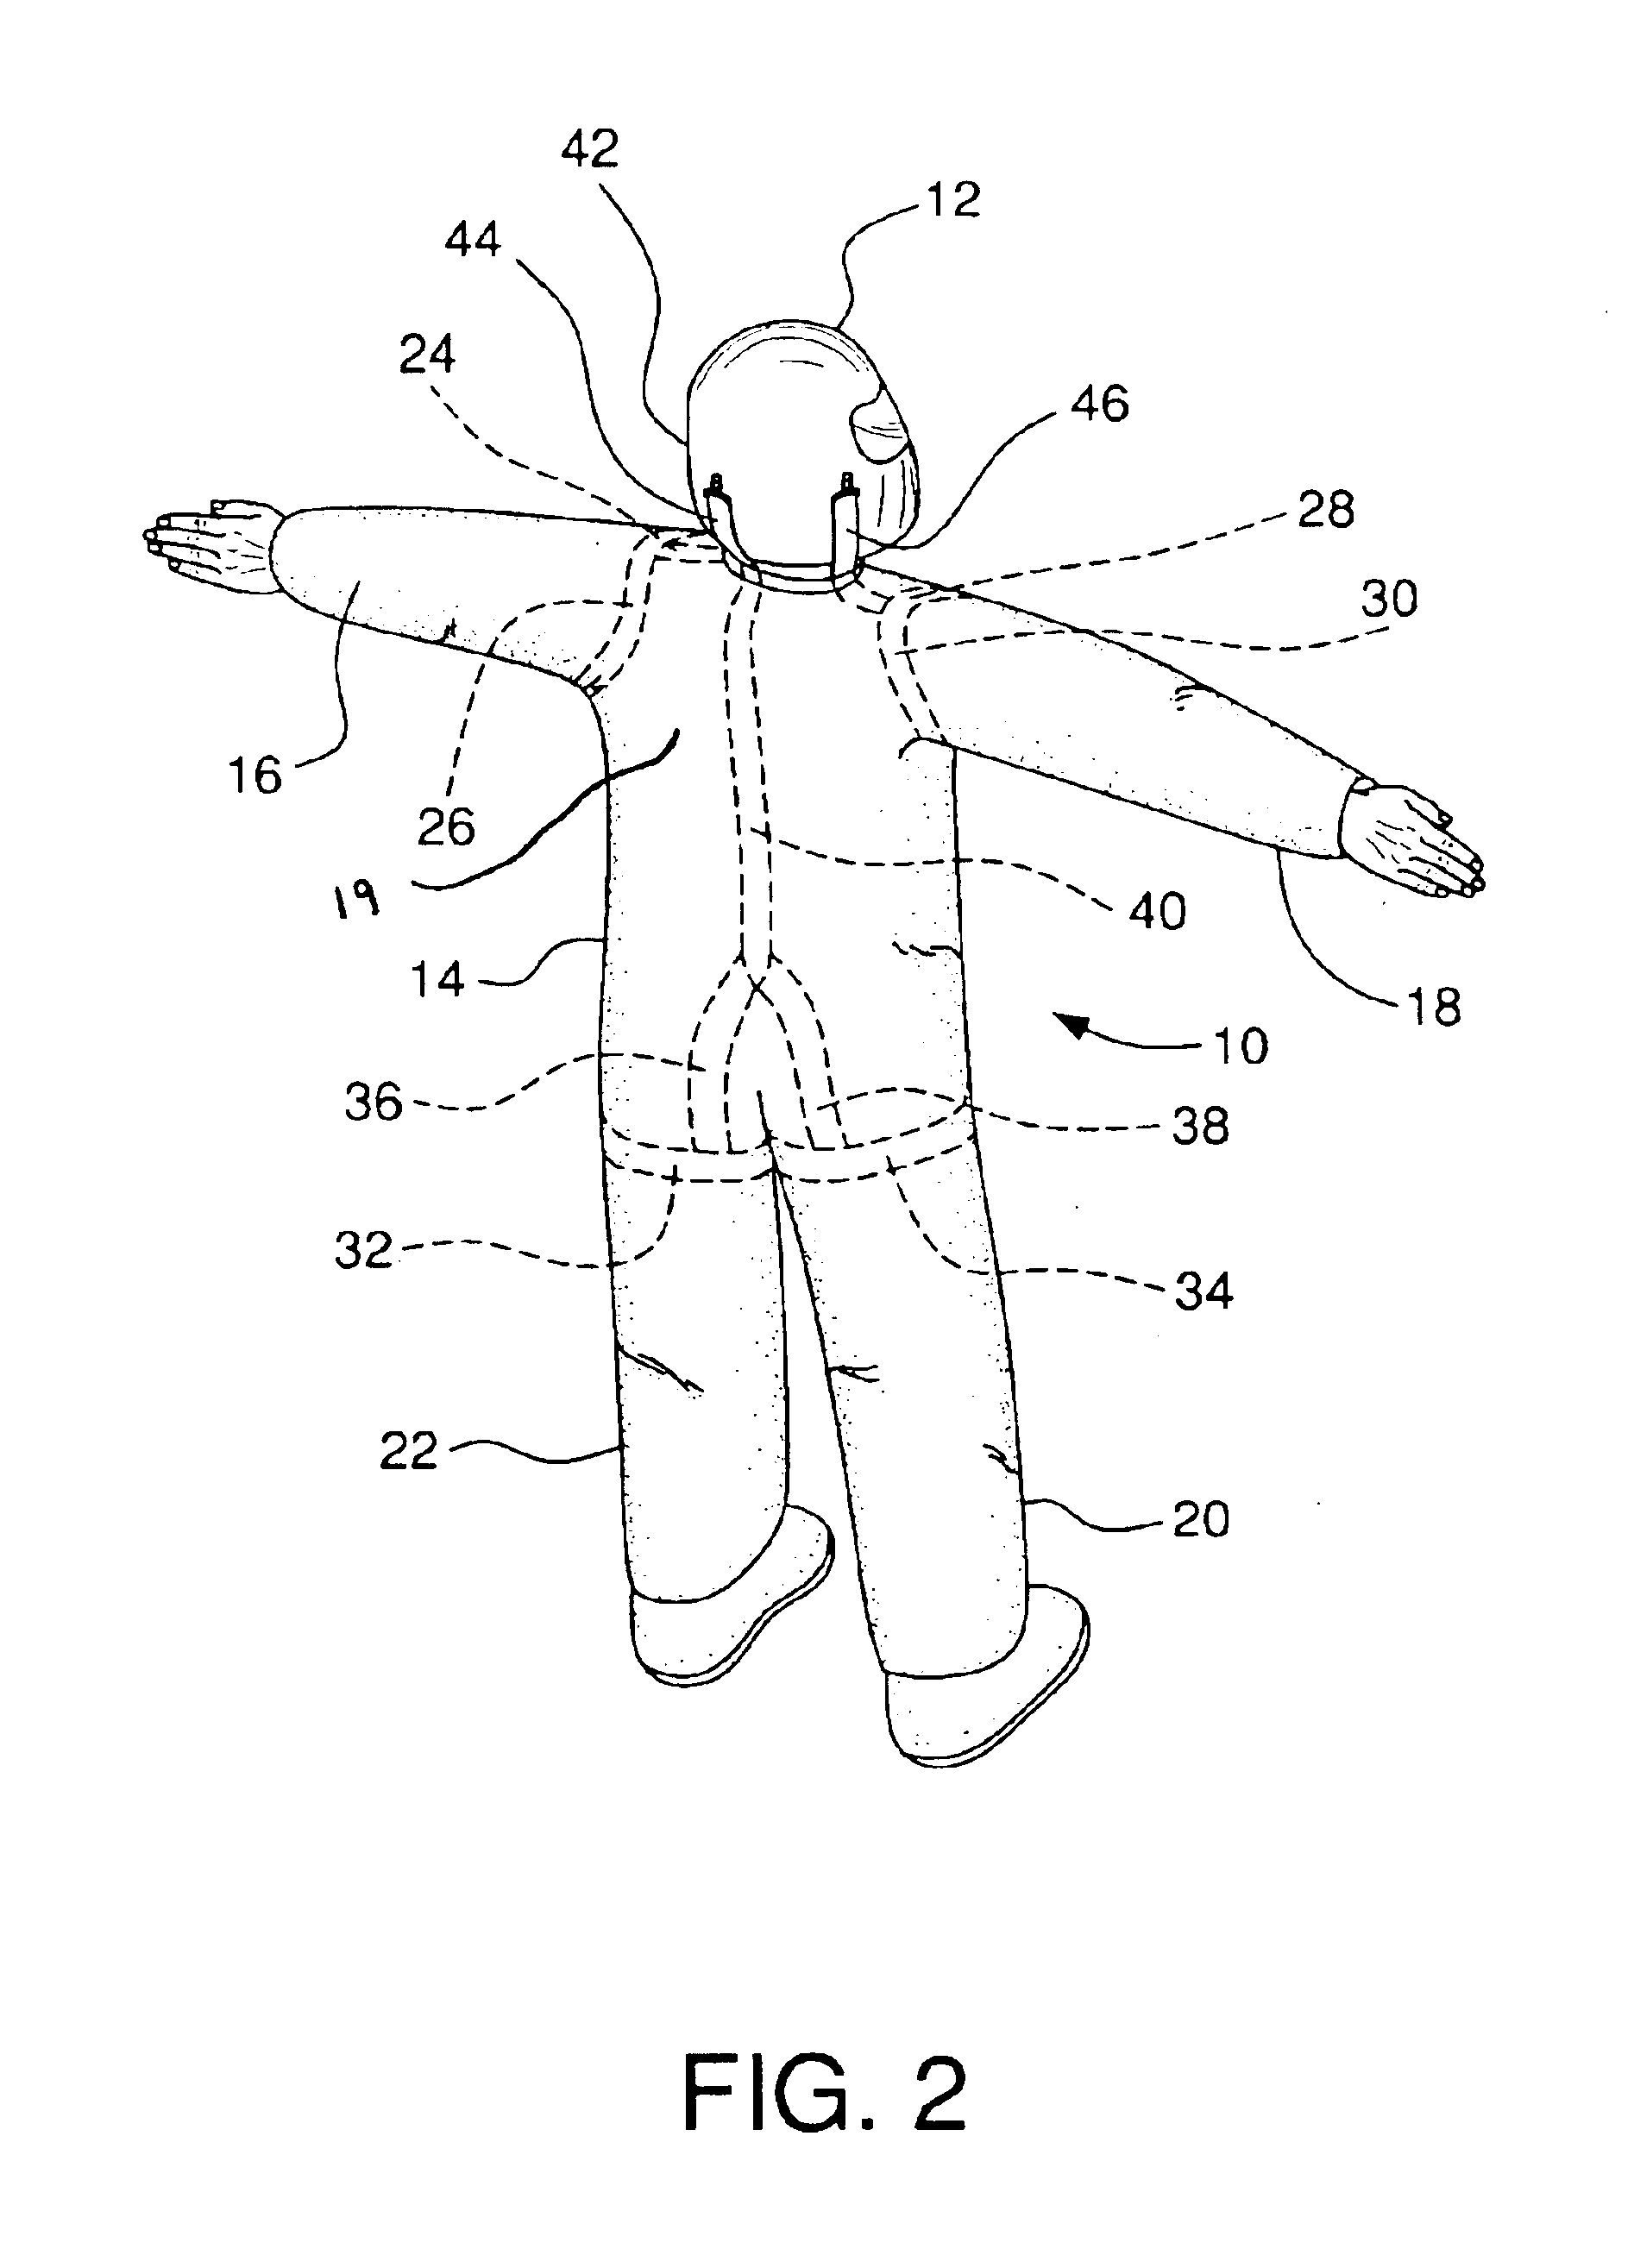 Safety device and system for head and neck stabilization